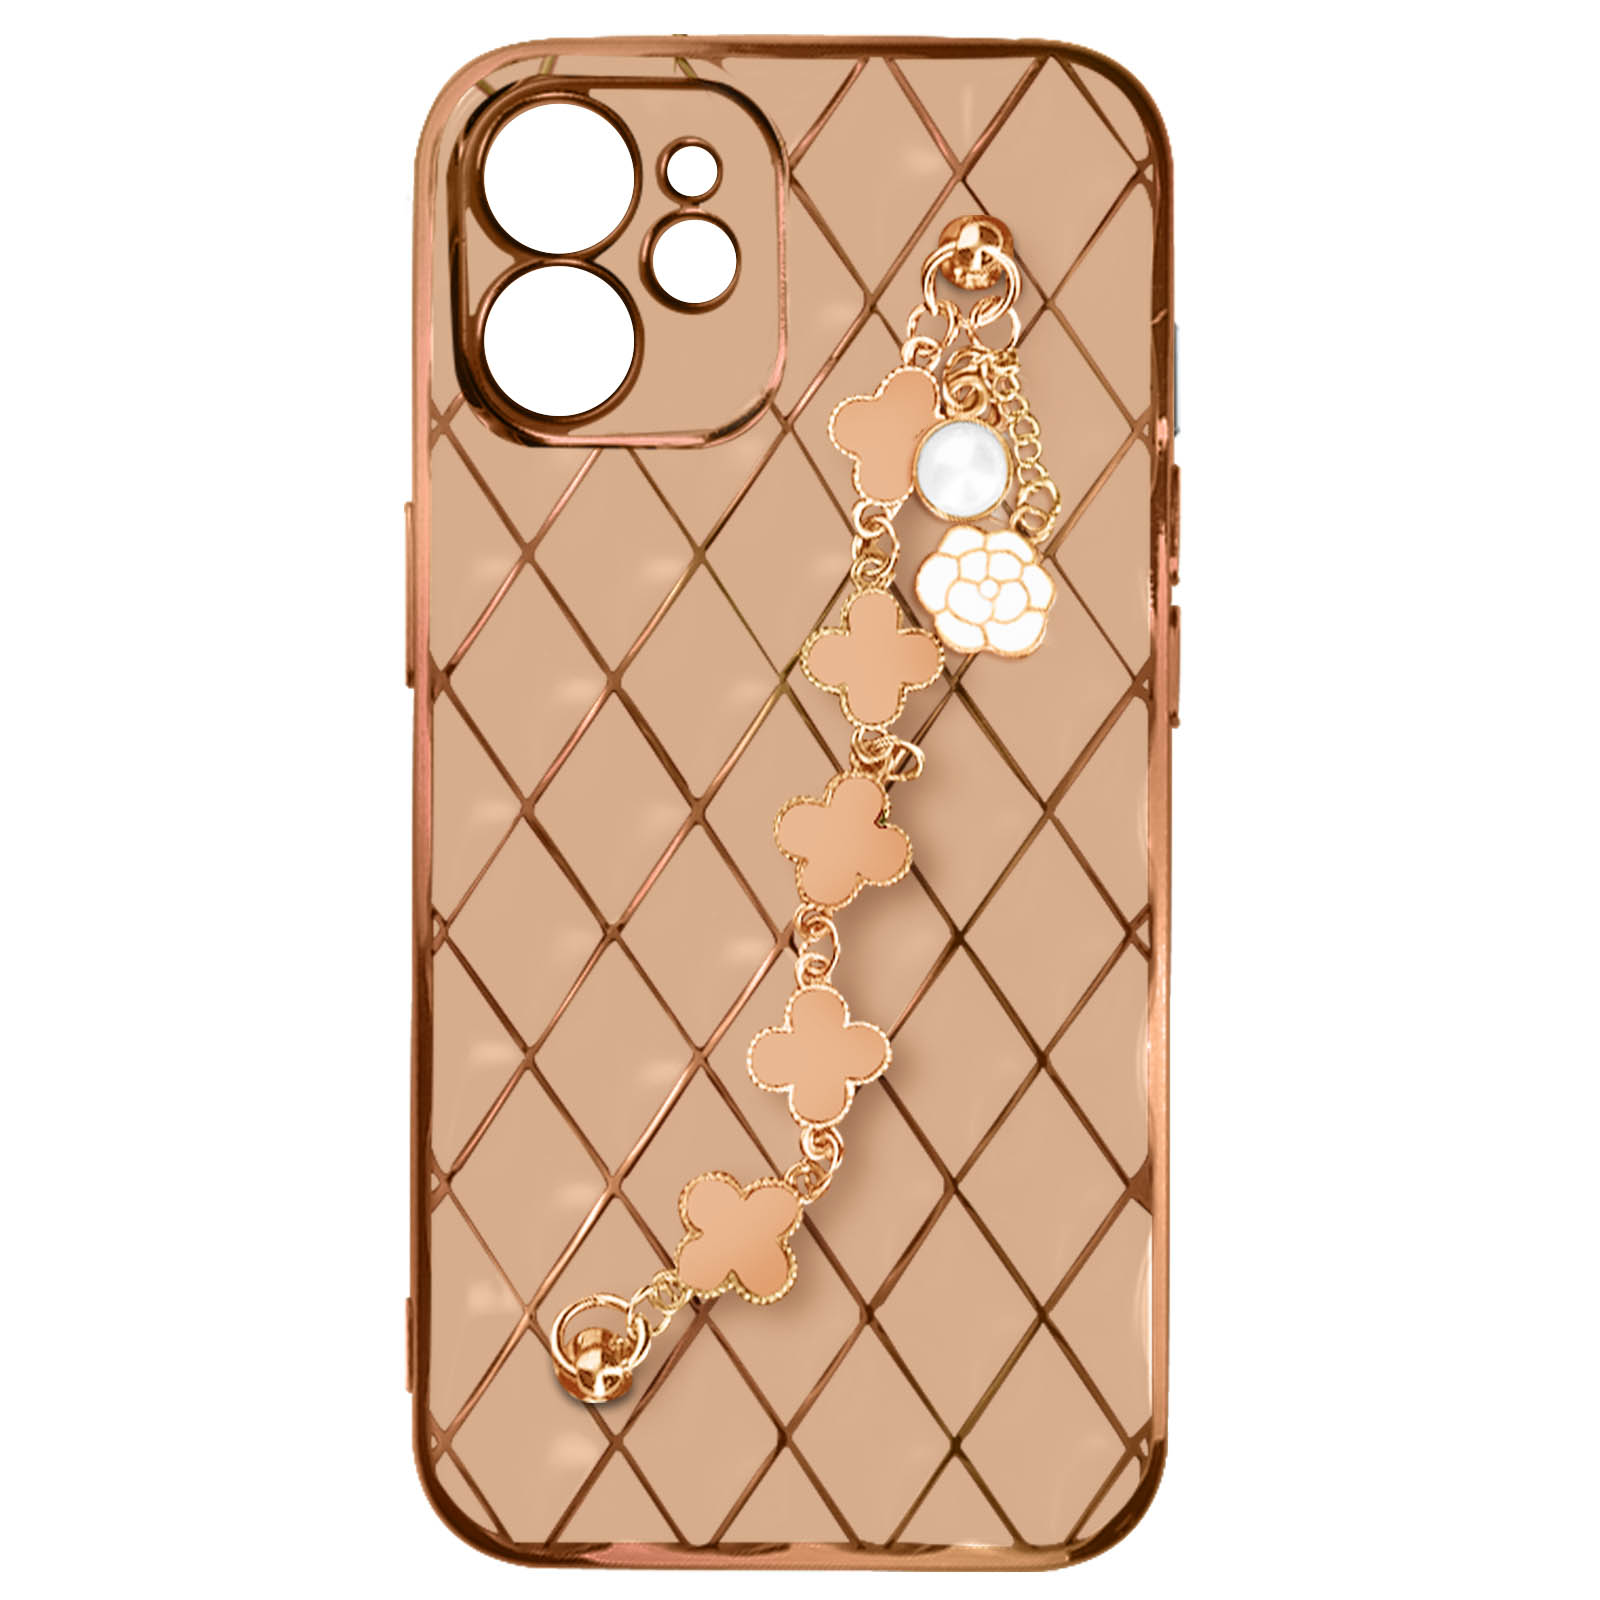 12, Rosegold Apple, AVIZAR iPhone Backcover, Series, Trend